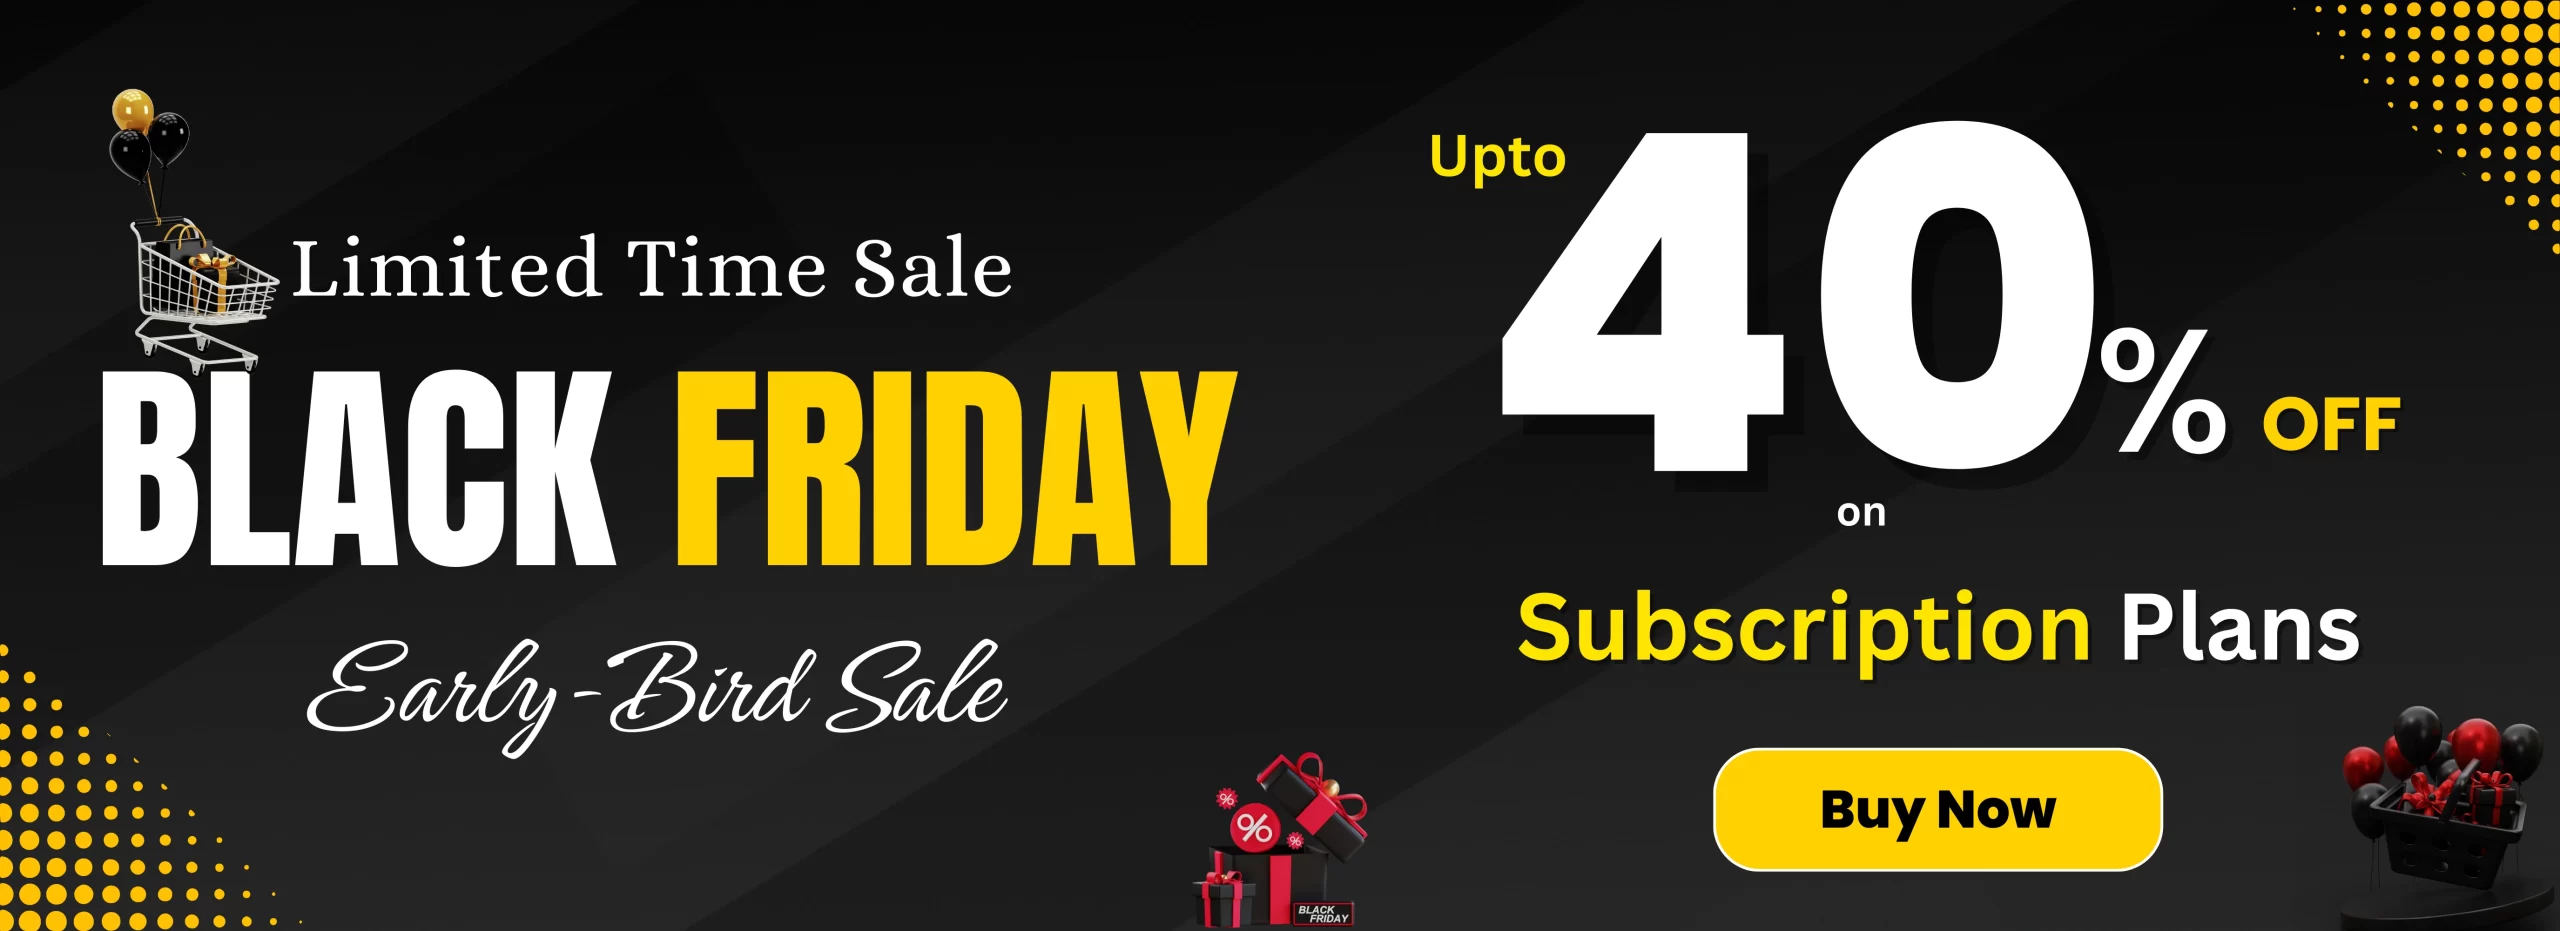 BF_Early_Bird_Sale_Subscription-Plans